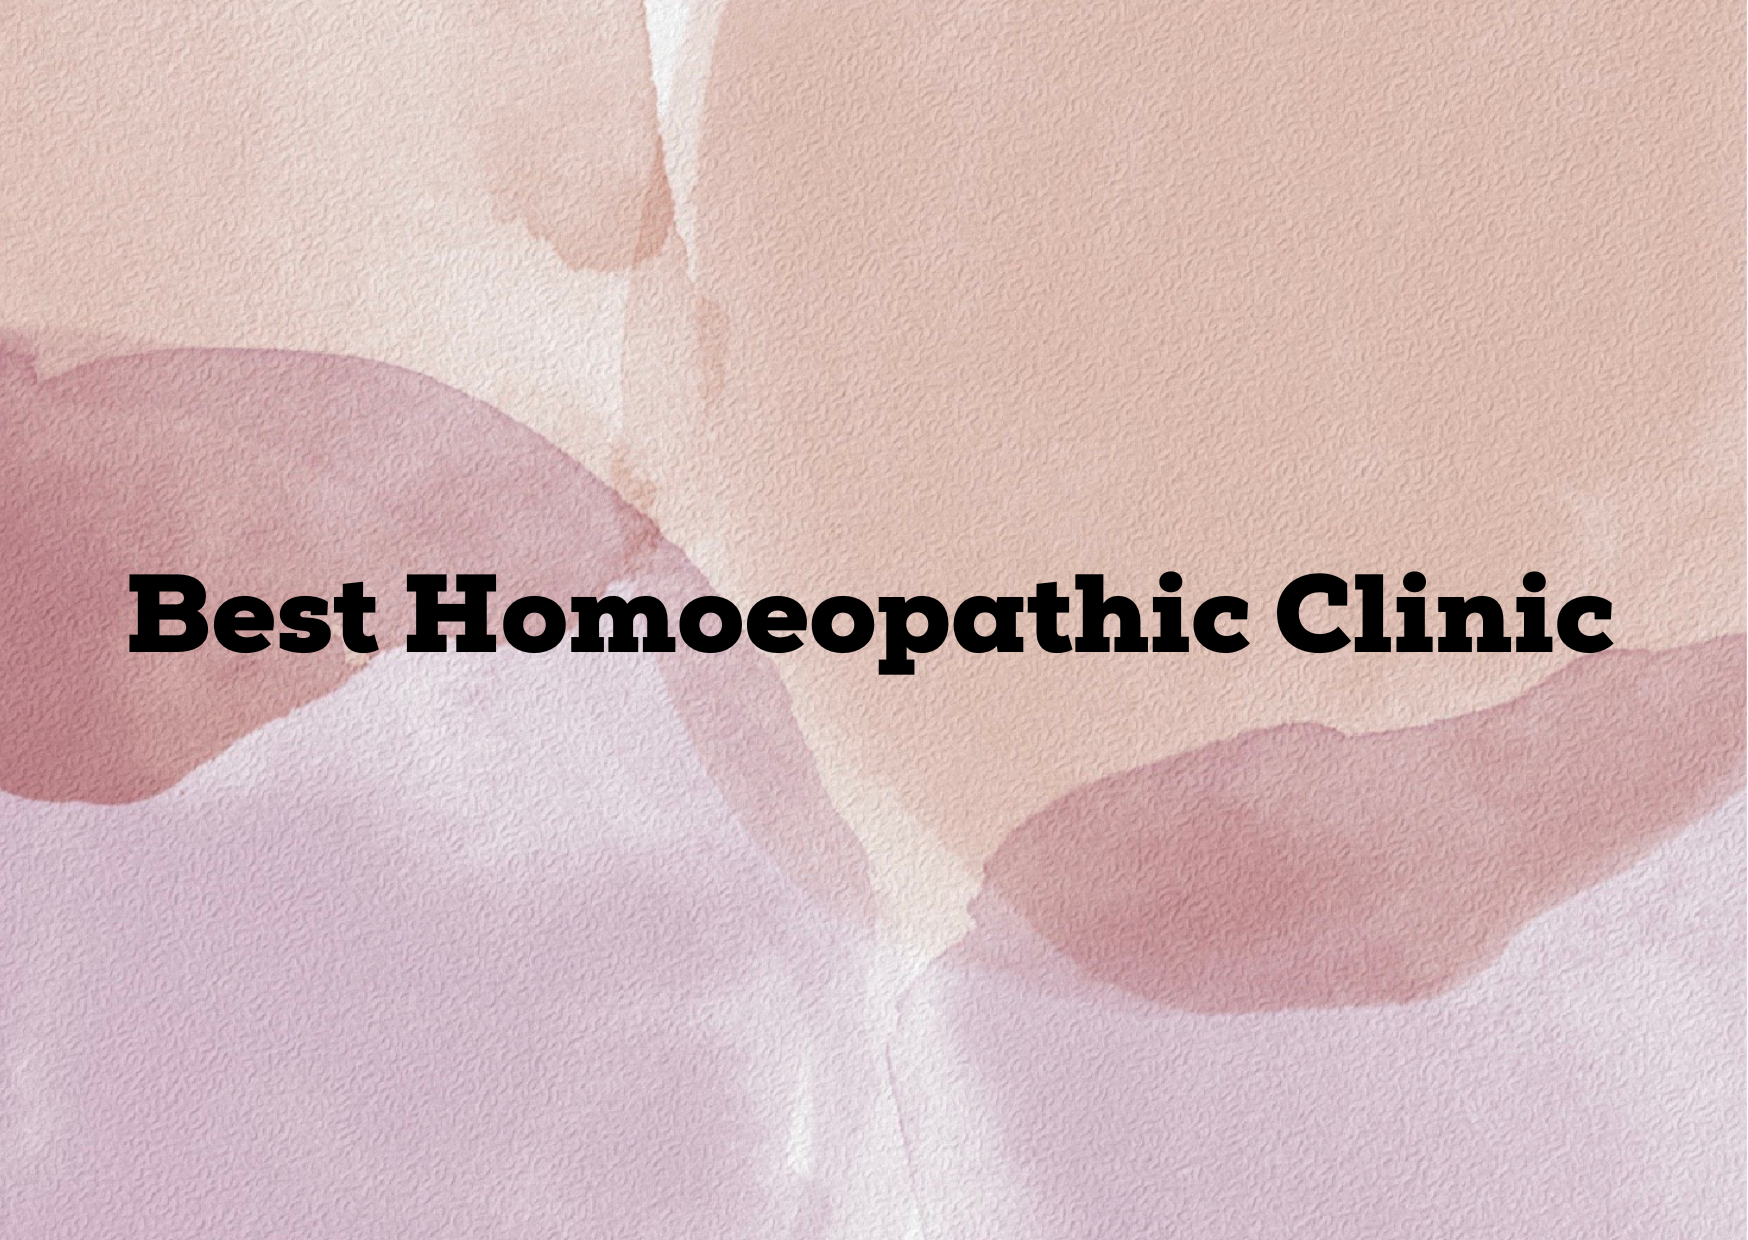 Best Homoeopathic Clinic,   